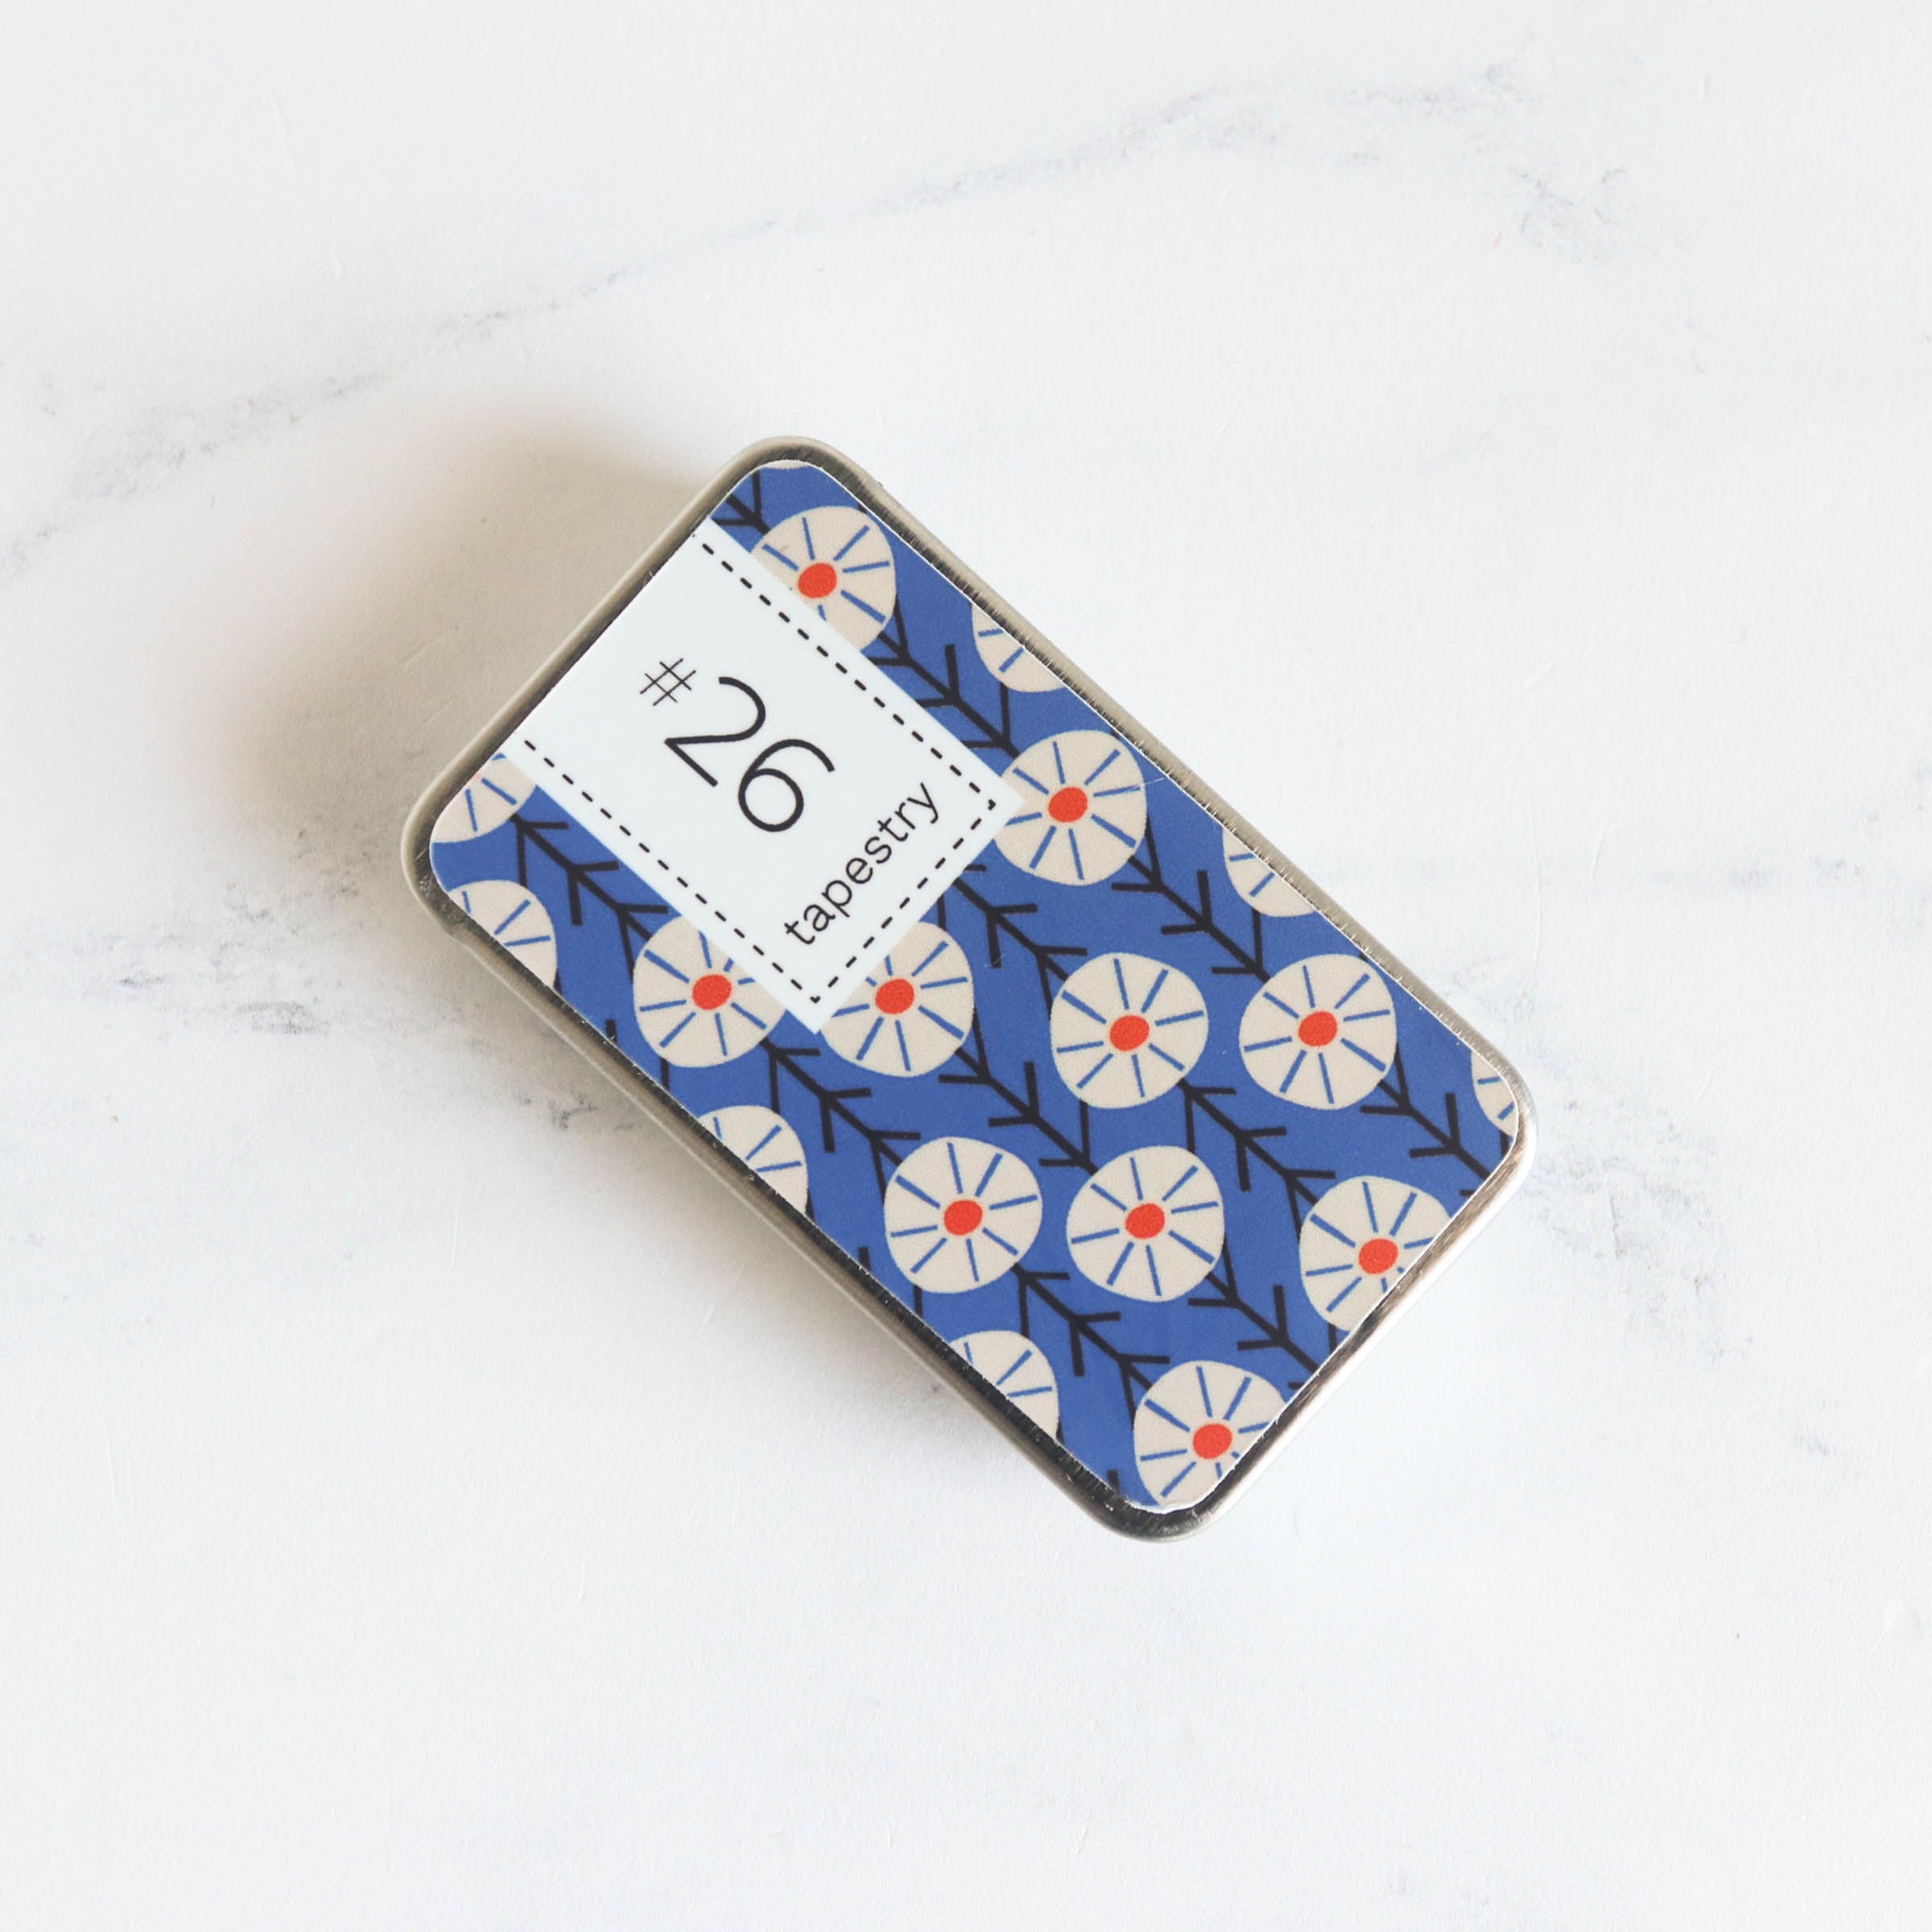 Get To The Point Teal Magnetic Needle Case Patterns